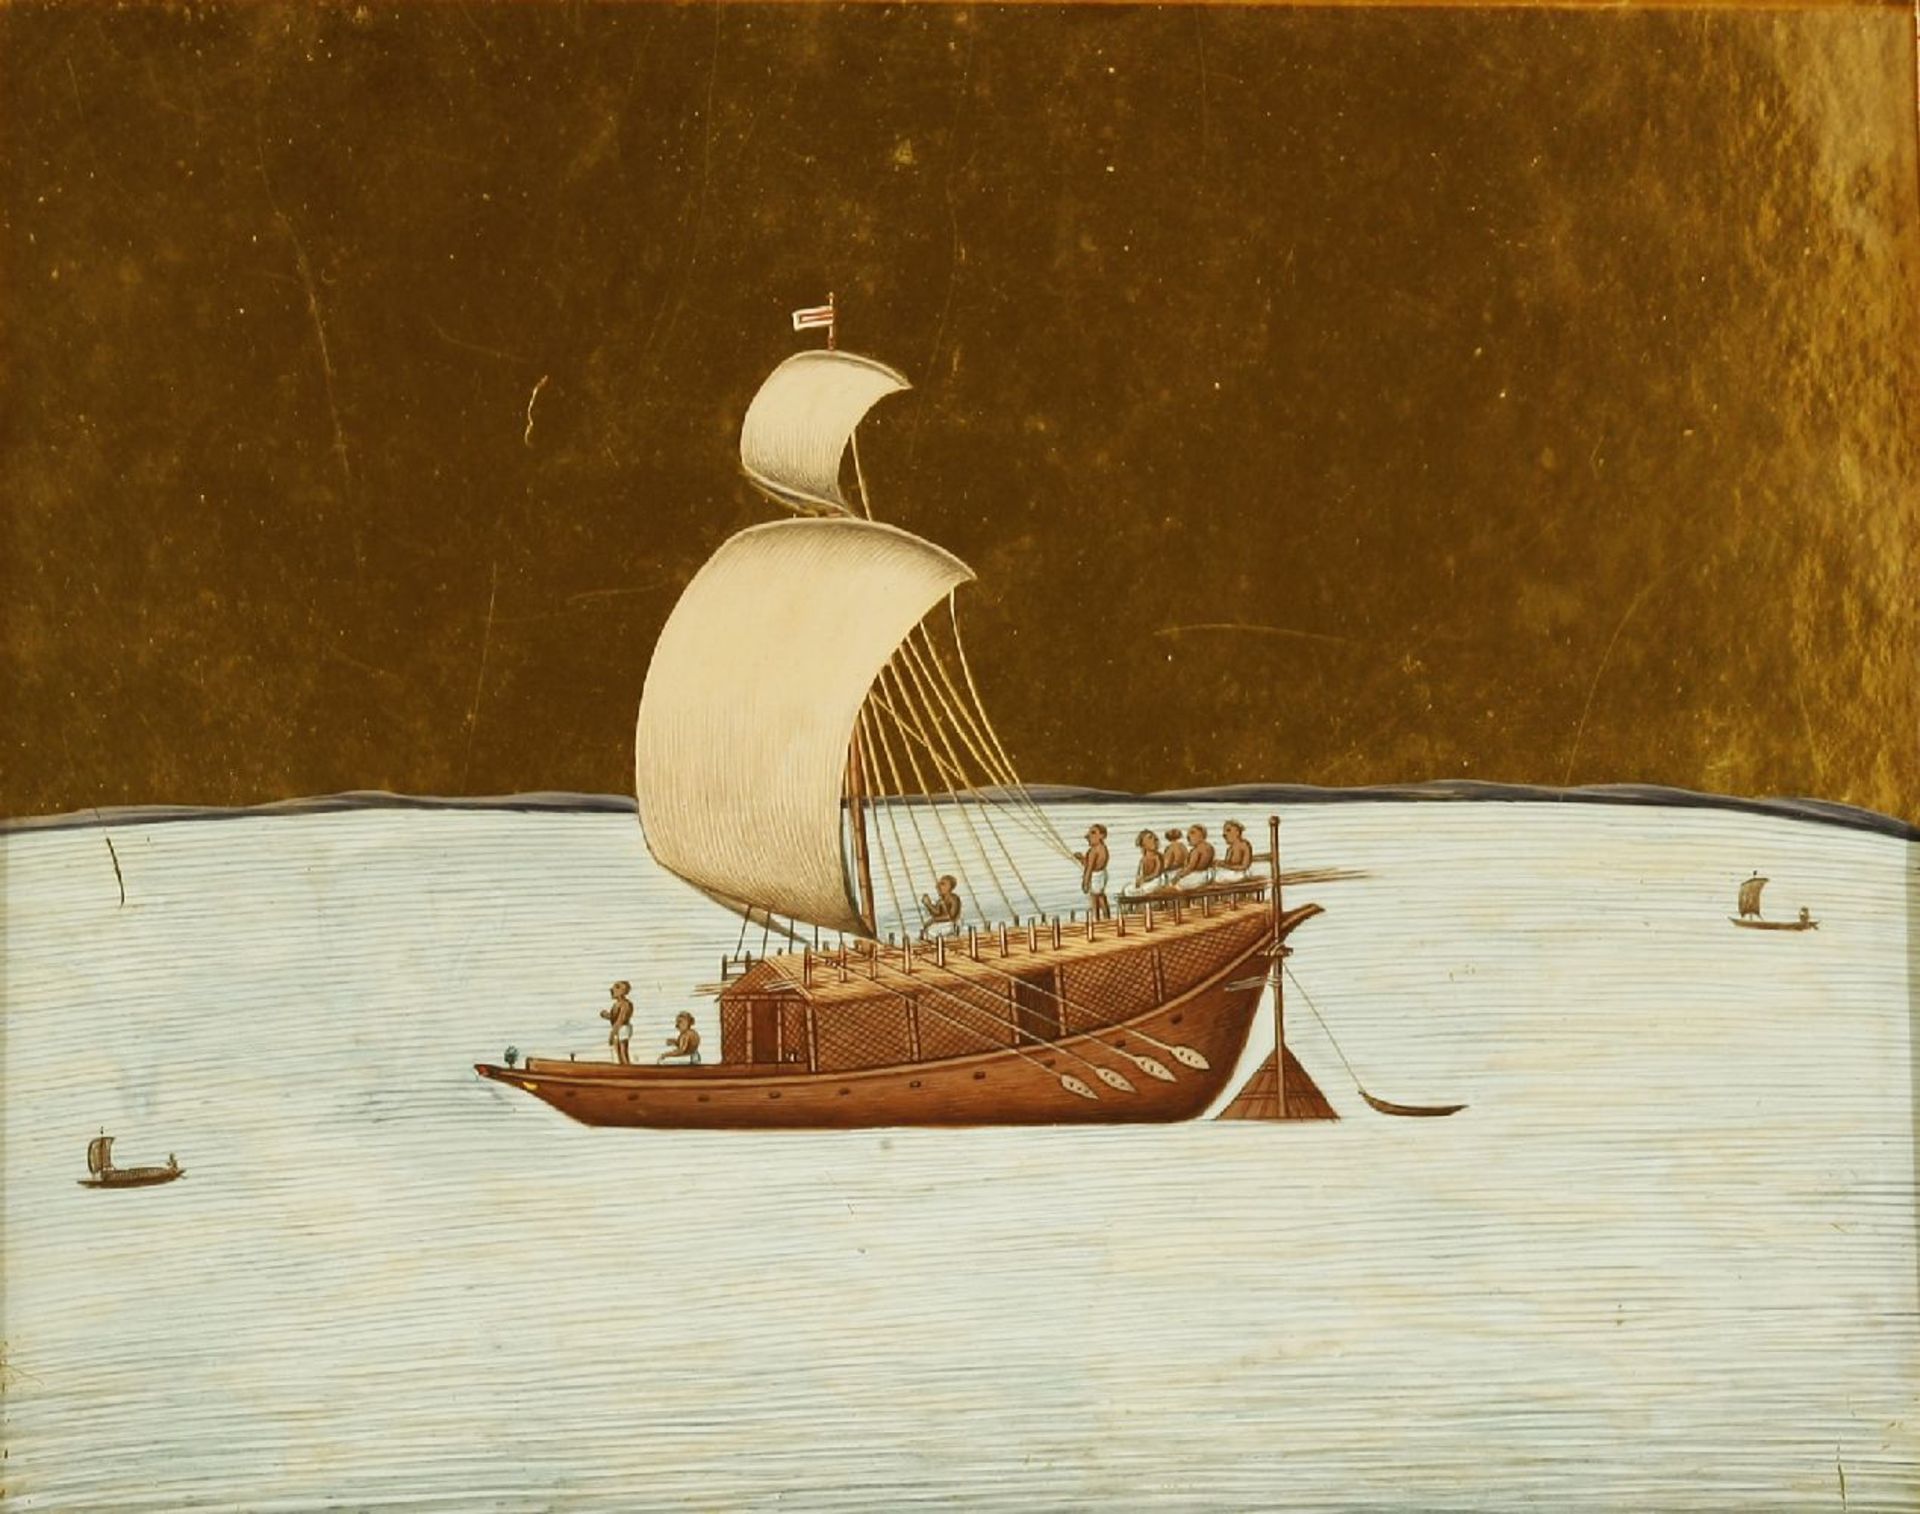 An Indian painting on mica,c.1815, Patna, of 'Budgerow', a sailing ship on a river,15 x 18.